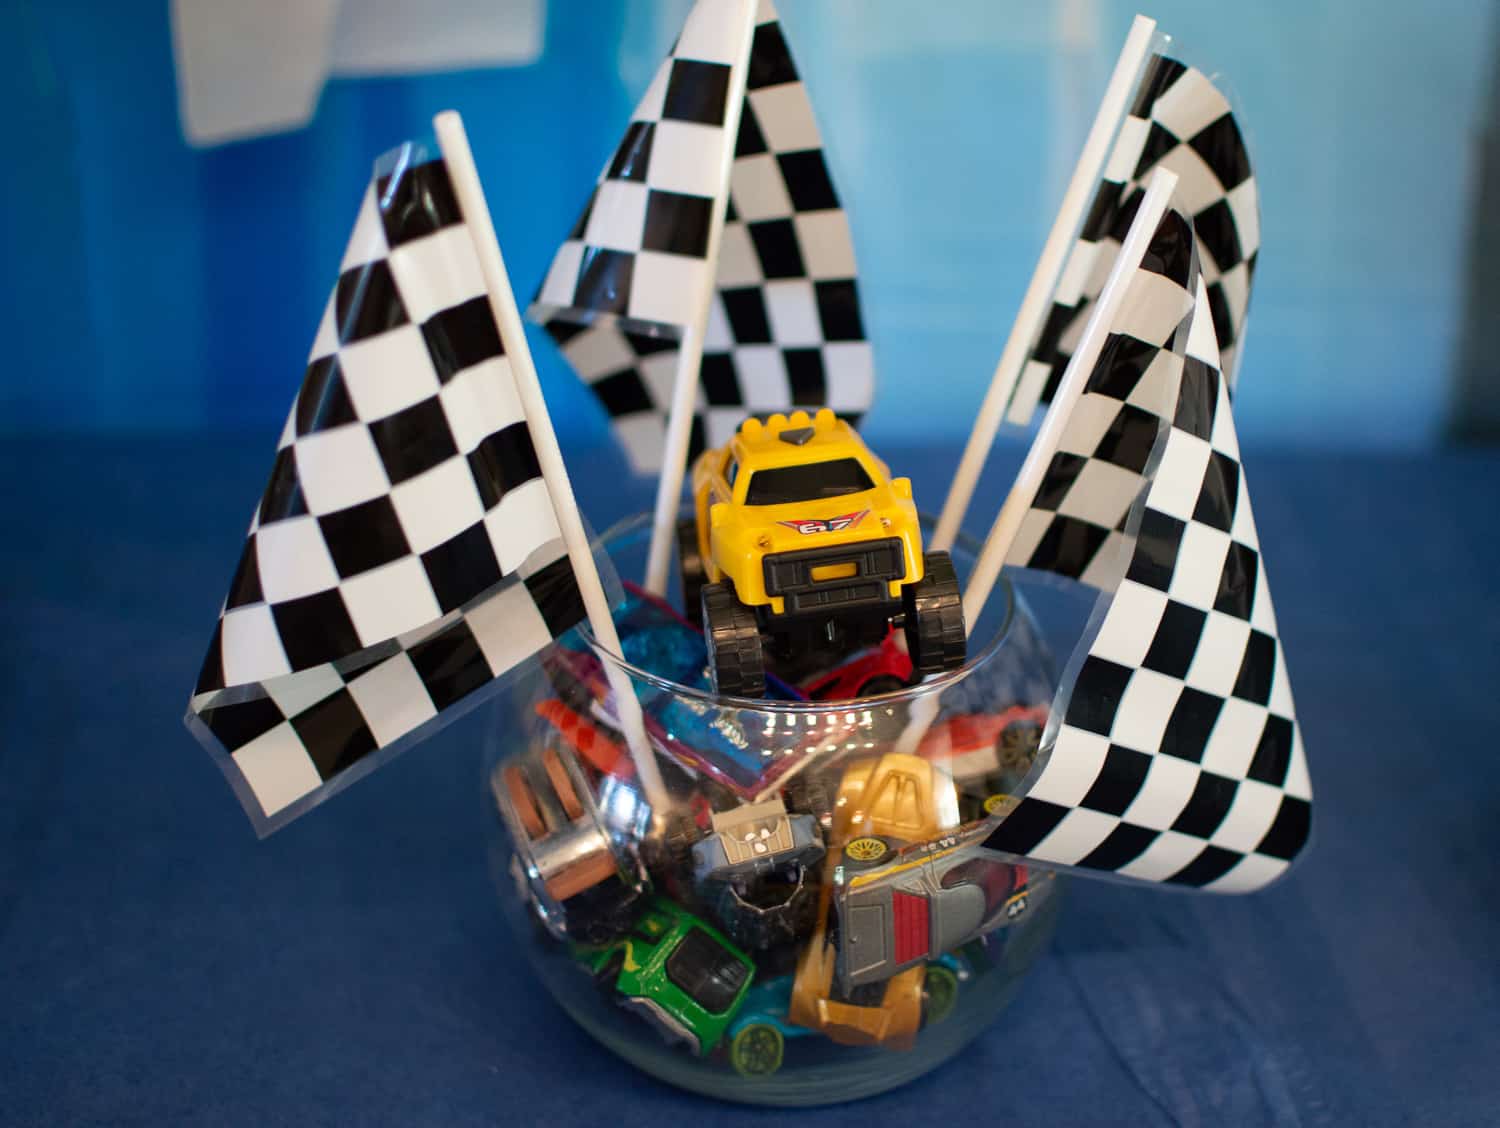 Checkered racing flag and truck centerpiece